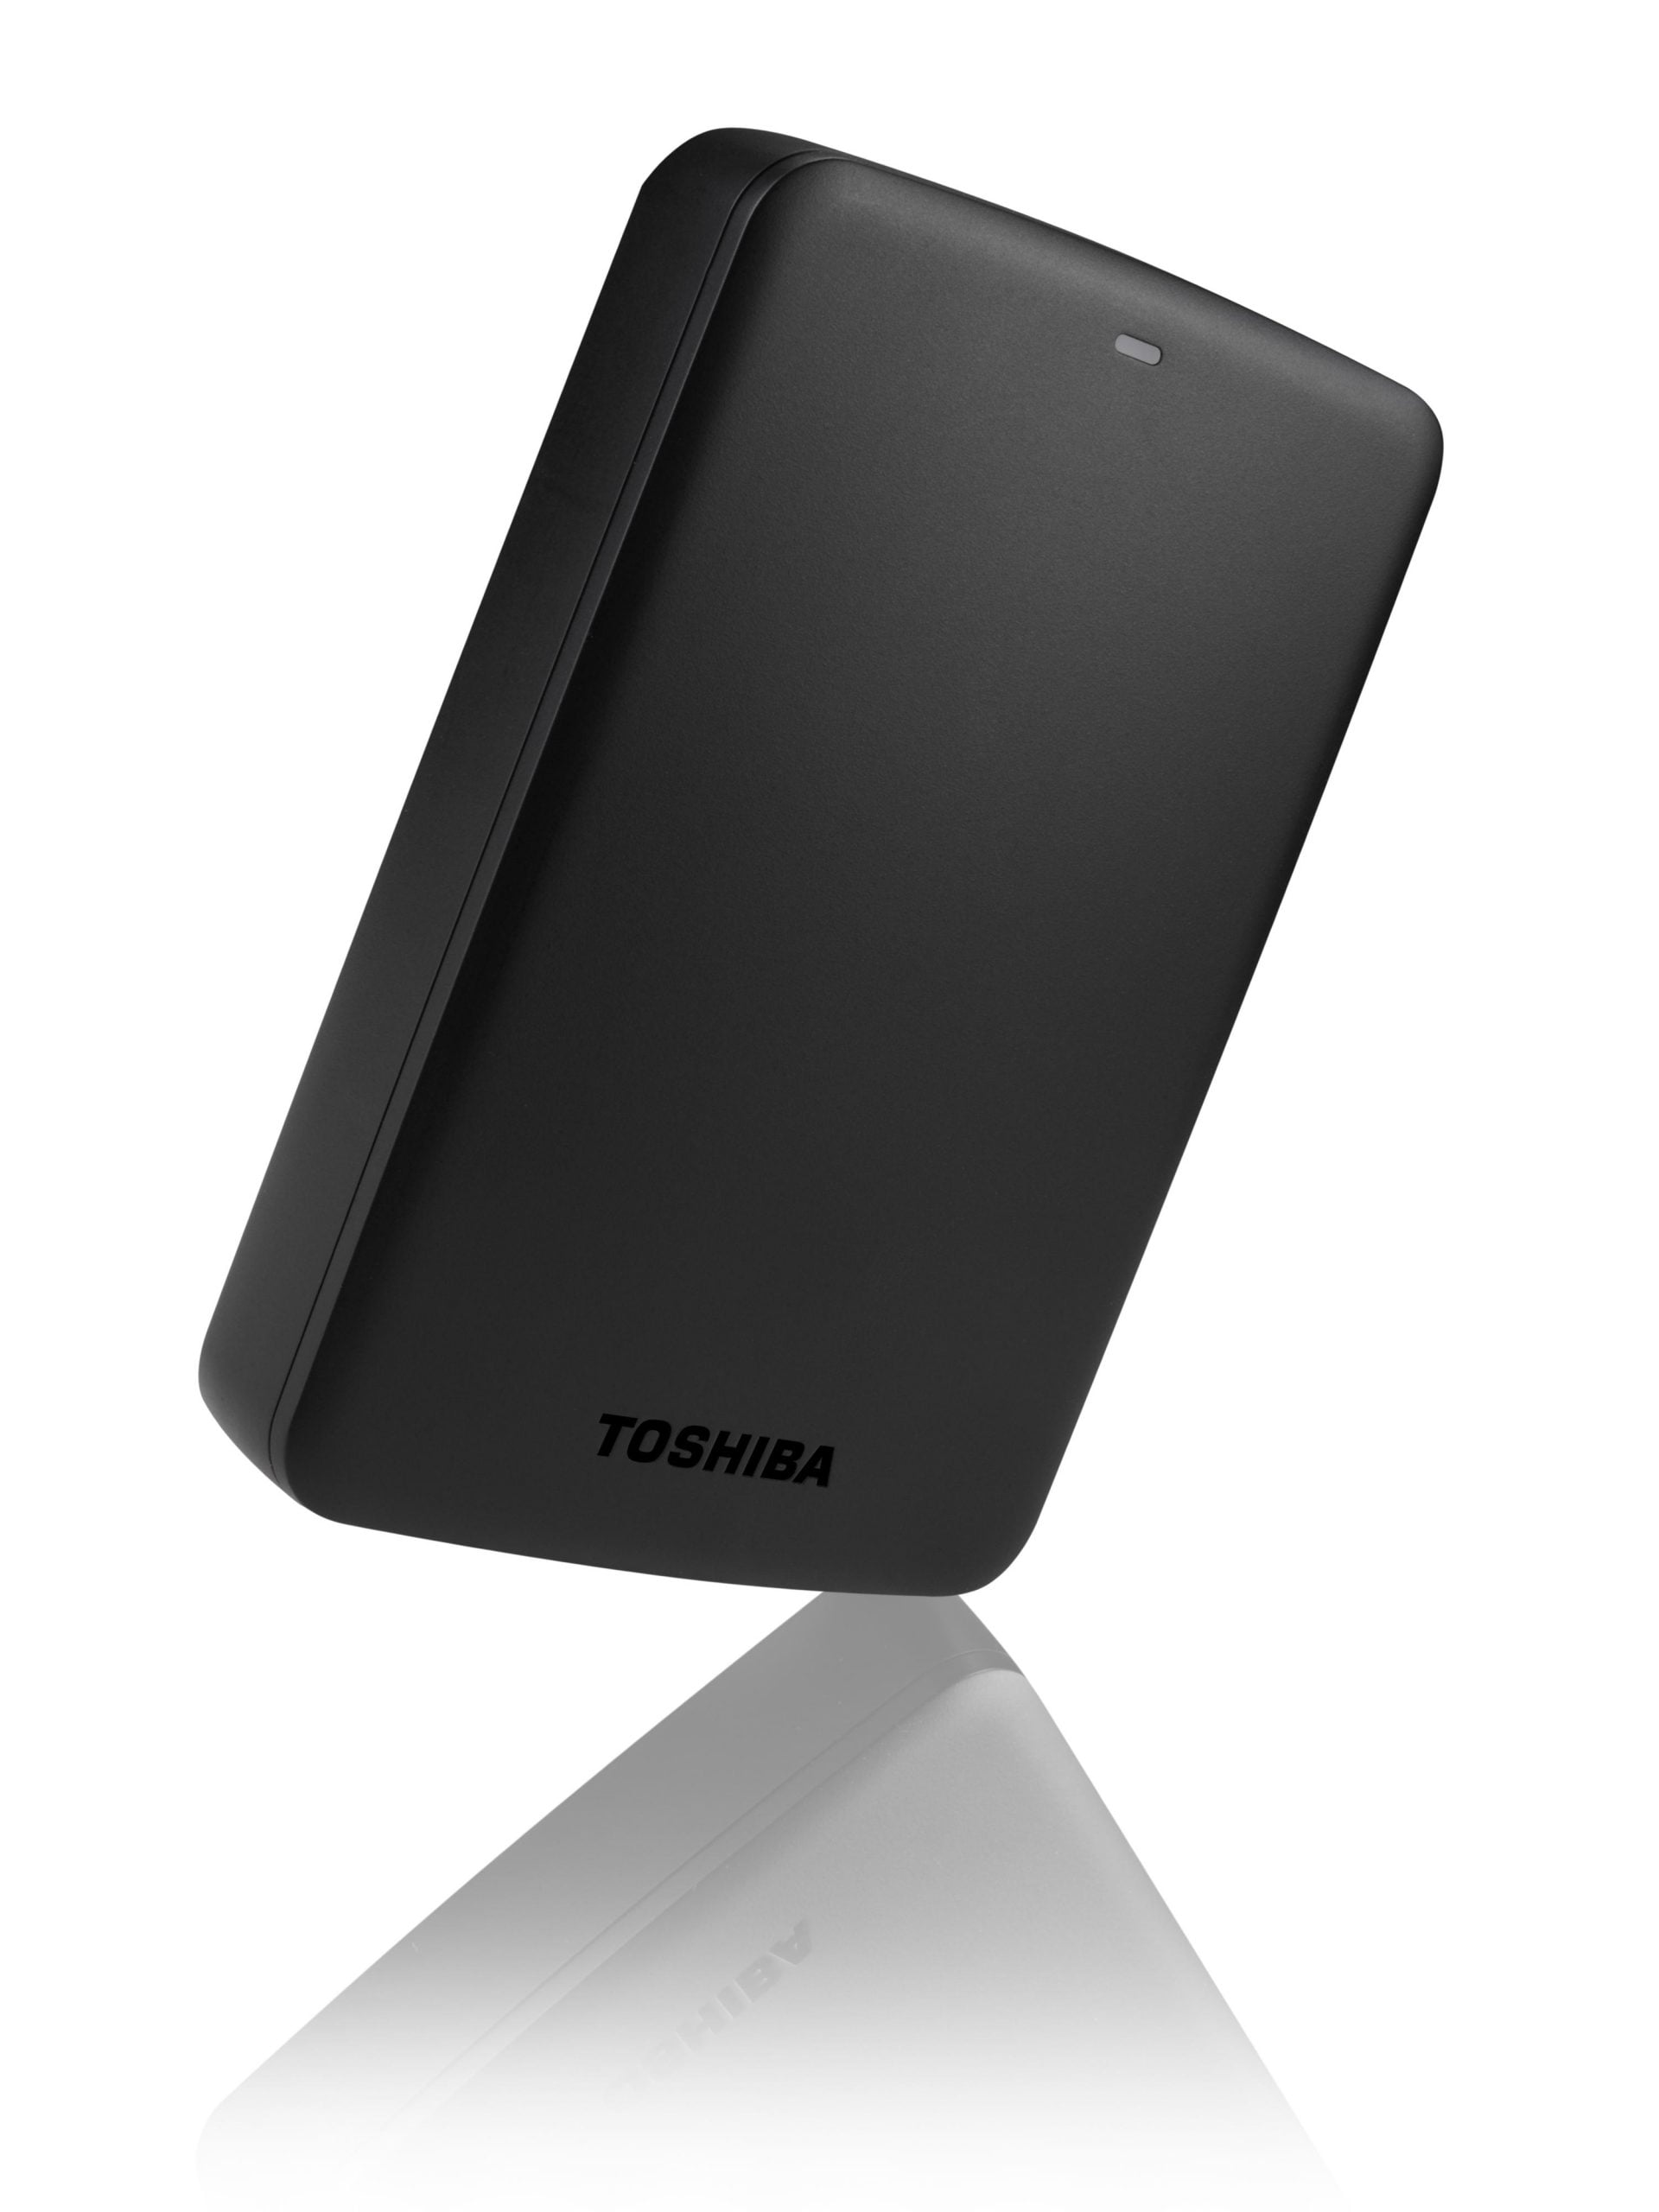 https://kevajo.com/wp-content/uploads/2022/09/Disque-dur-Externe-Toshiba-1TO-2-scaled-1.jpg